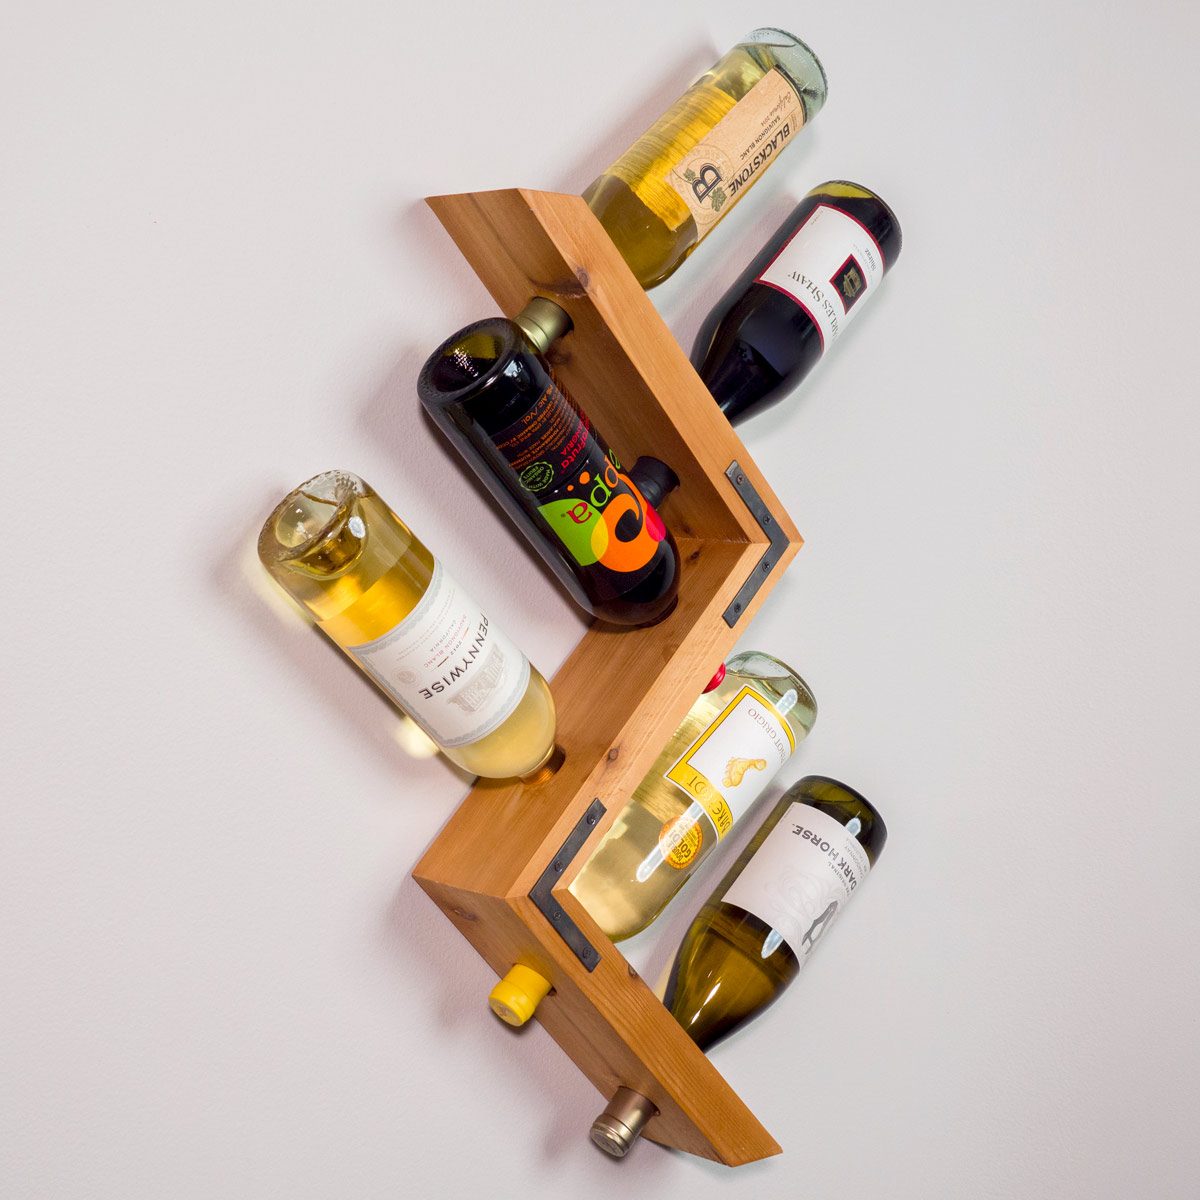 Saturday Morning Workshop: How to Build a Wall-Mounted Wine Rack